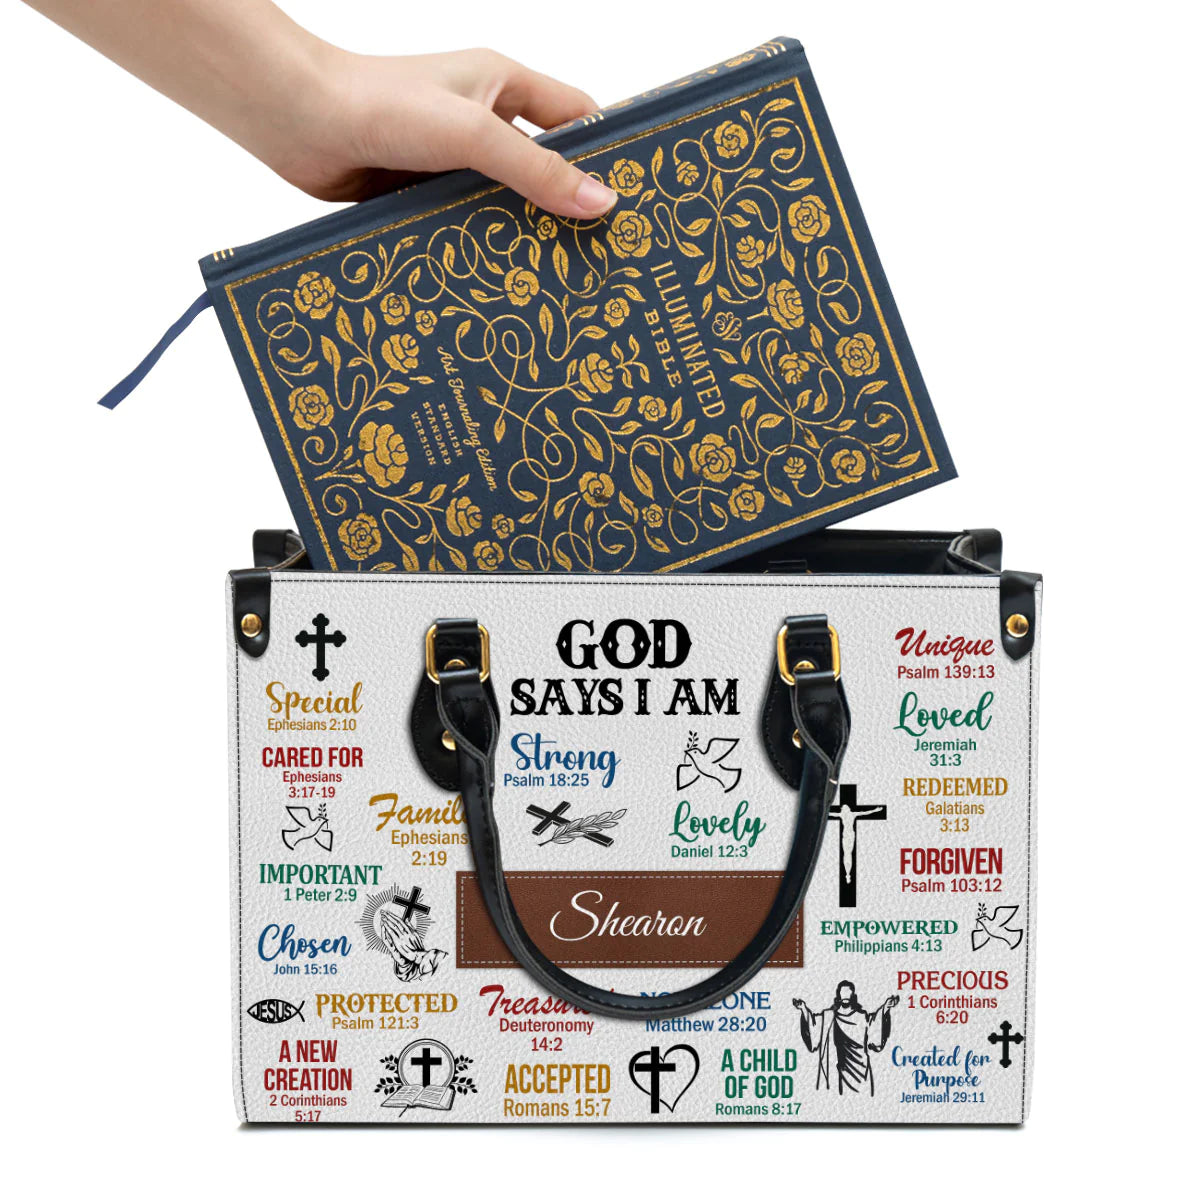 Christianart Handbag, Personalized Hand Bag, What God Says About You, Personalized Gifts, Gifts for Women. - Christian Art Bag